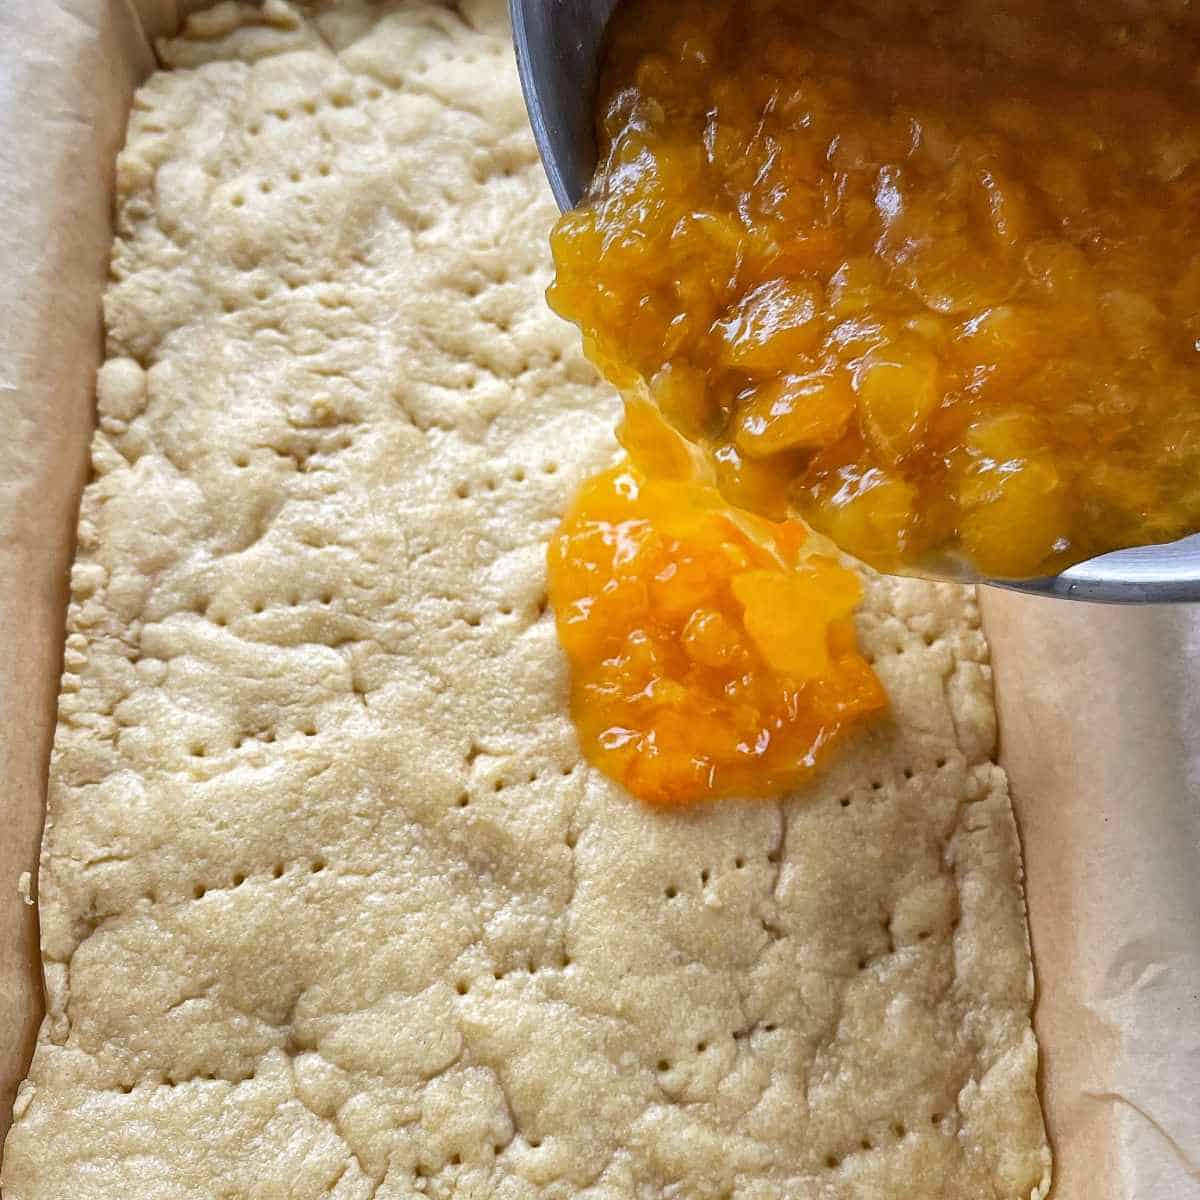 The cooked apricots being poured onto the cooked base for the baked apricot slice.